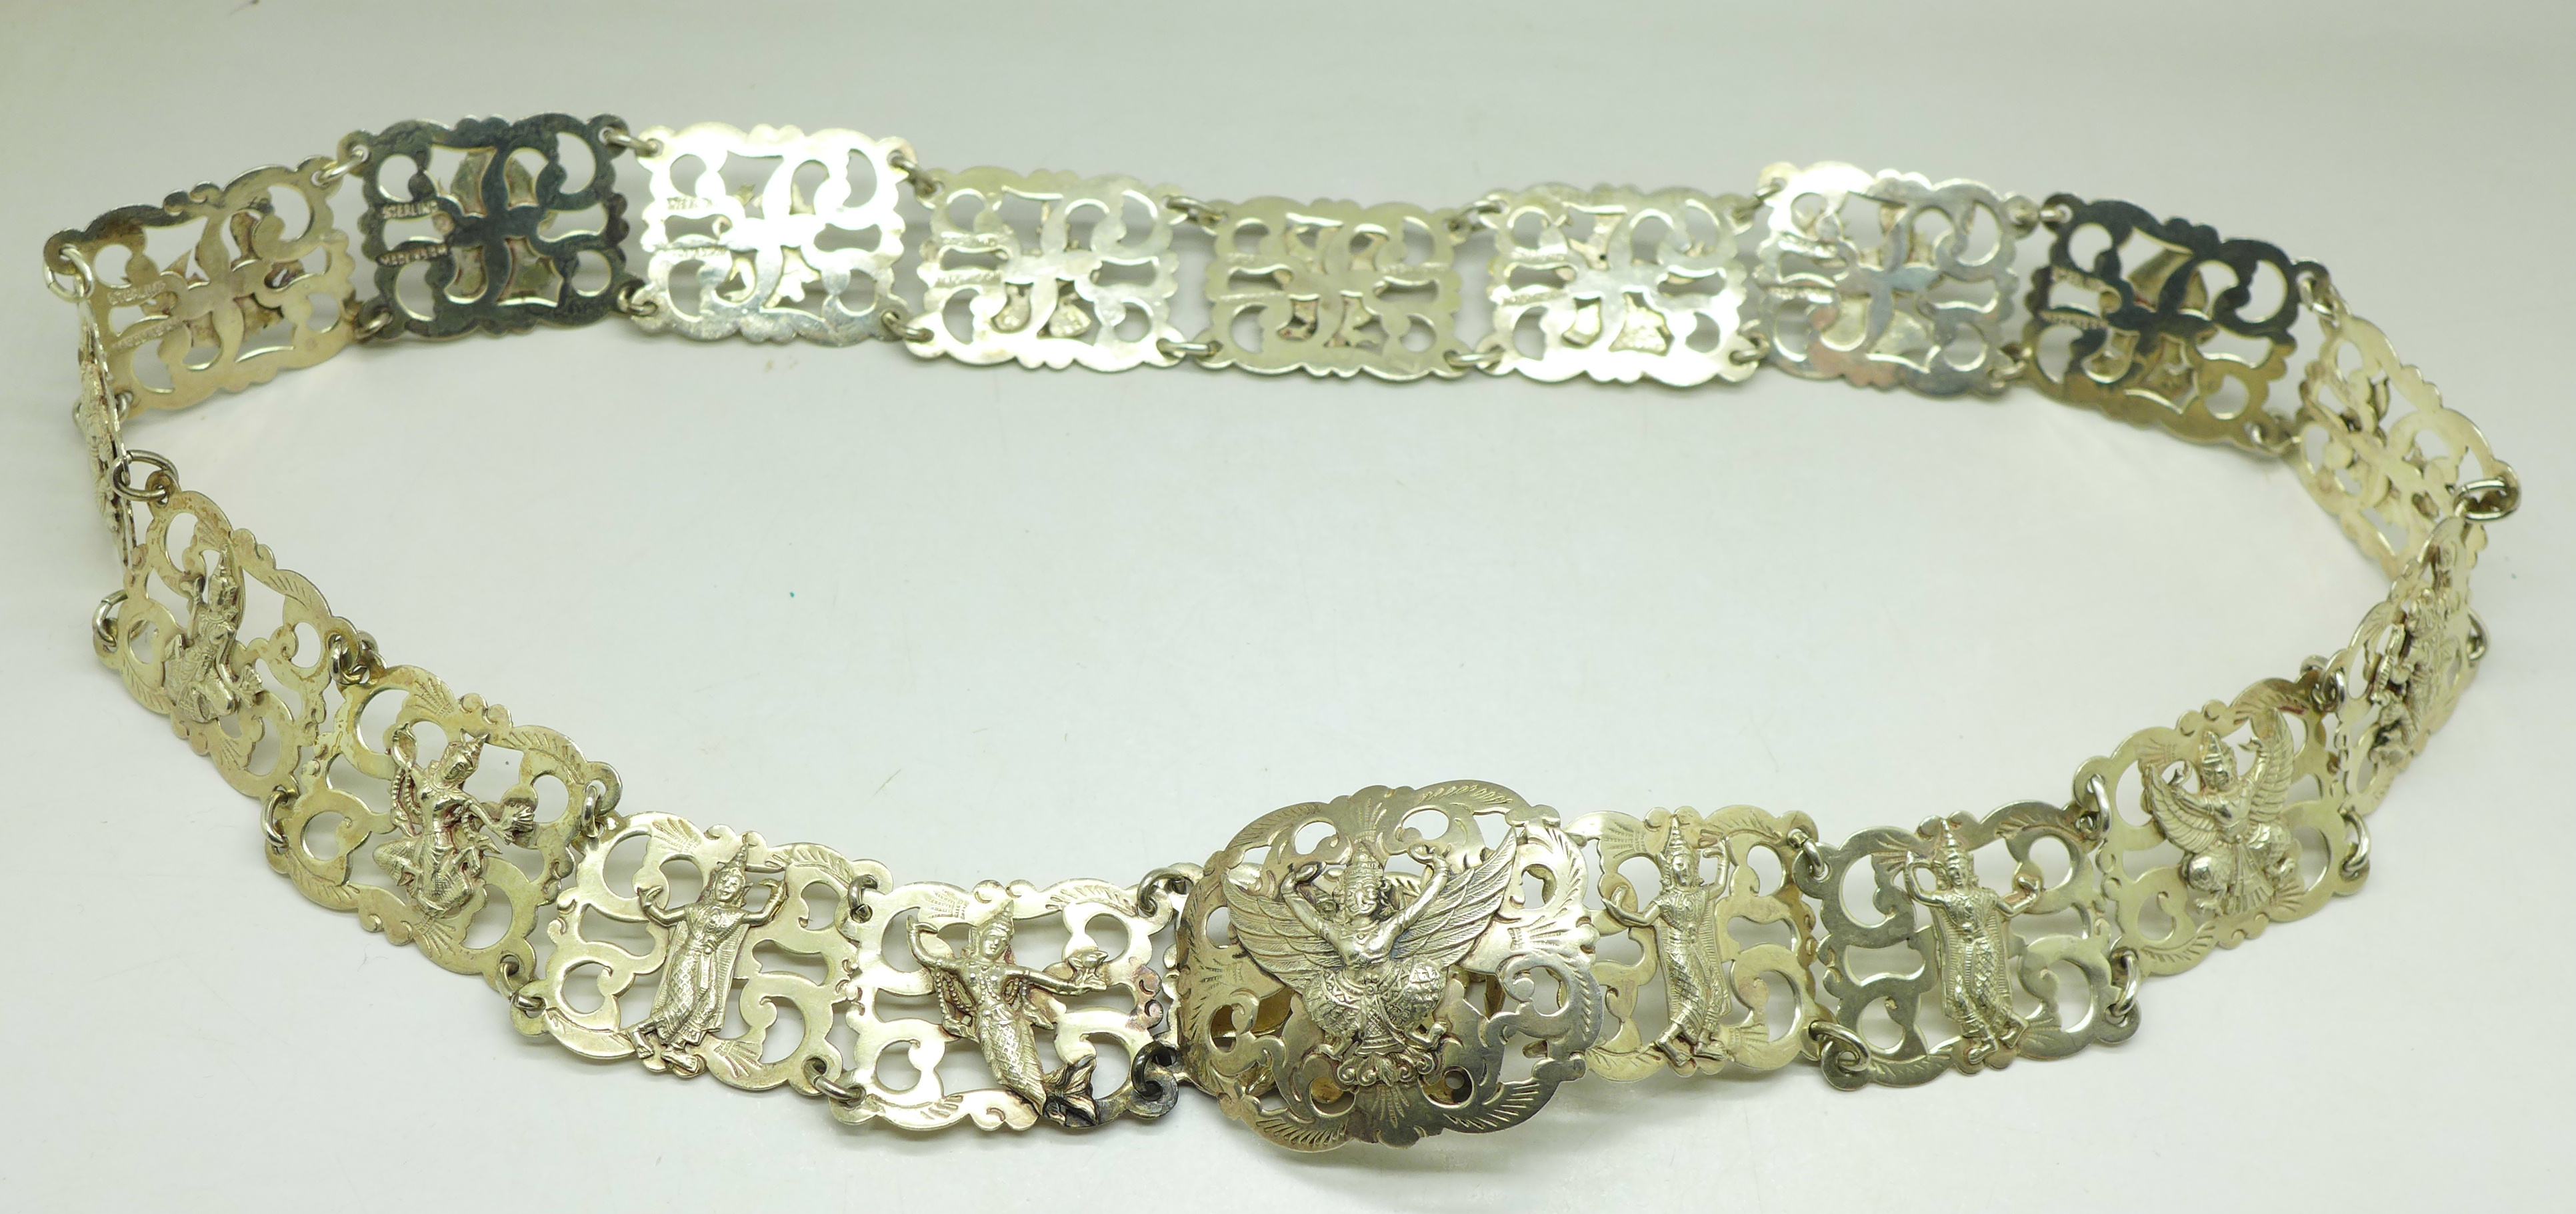 A Siam sterling silver belt, 193g, (fastening clip requires repair)